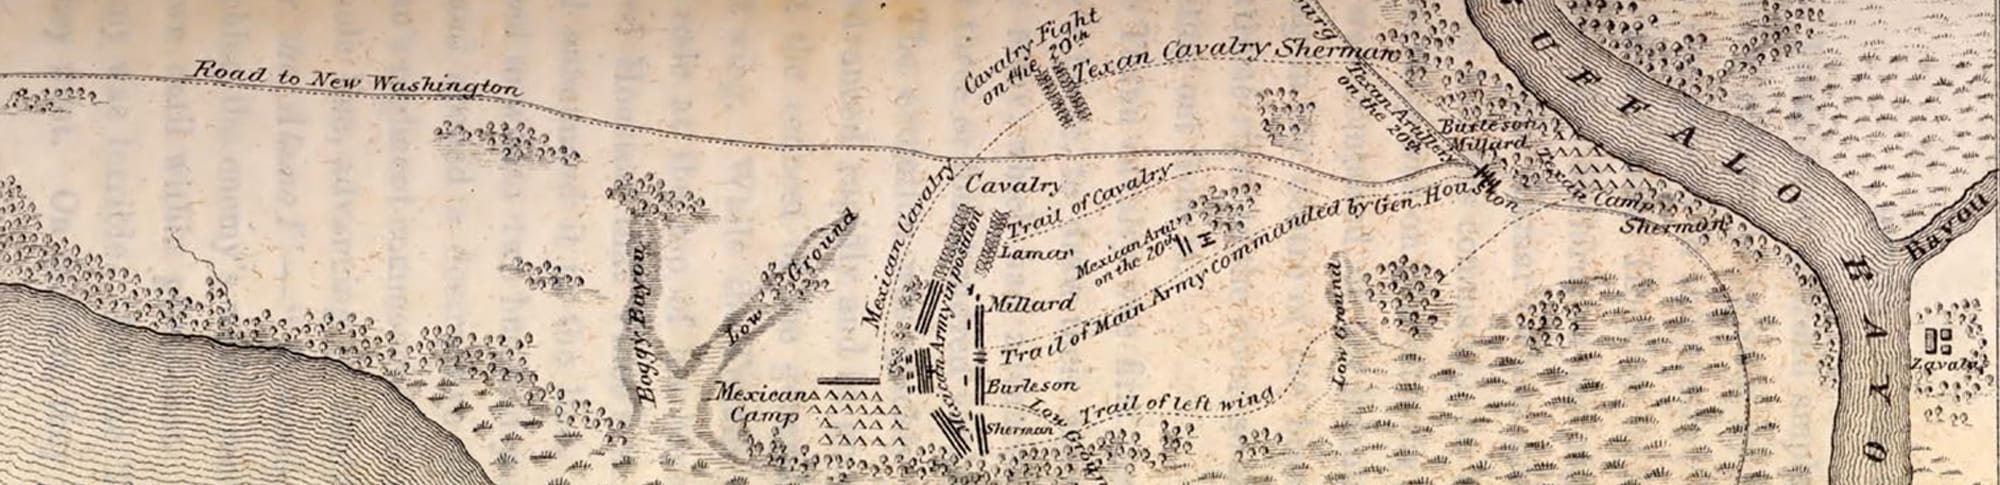 Part of an old map of the San Jacinto area from the Texas Revolution